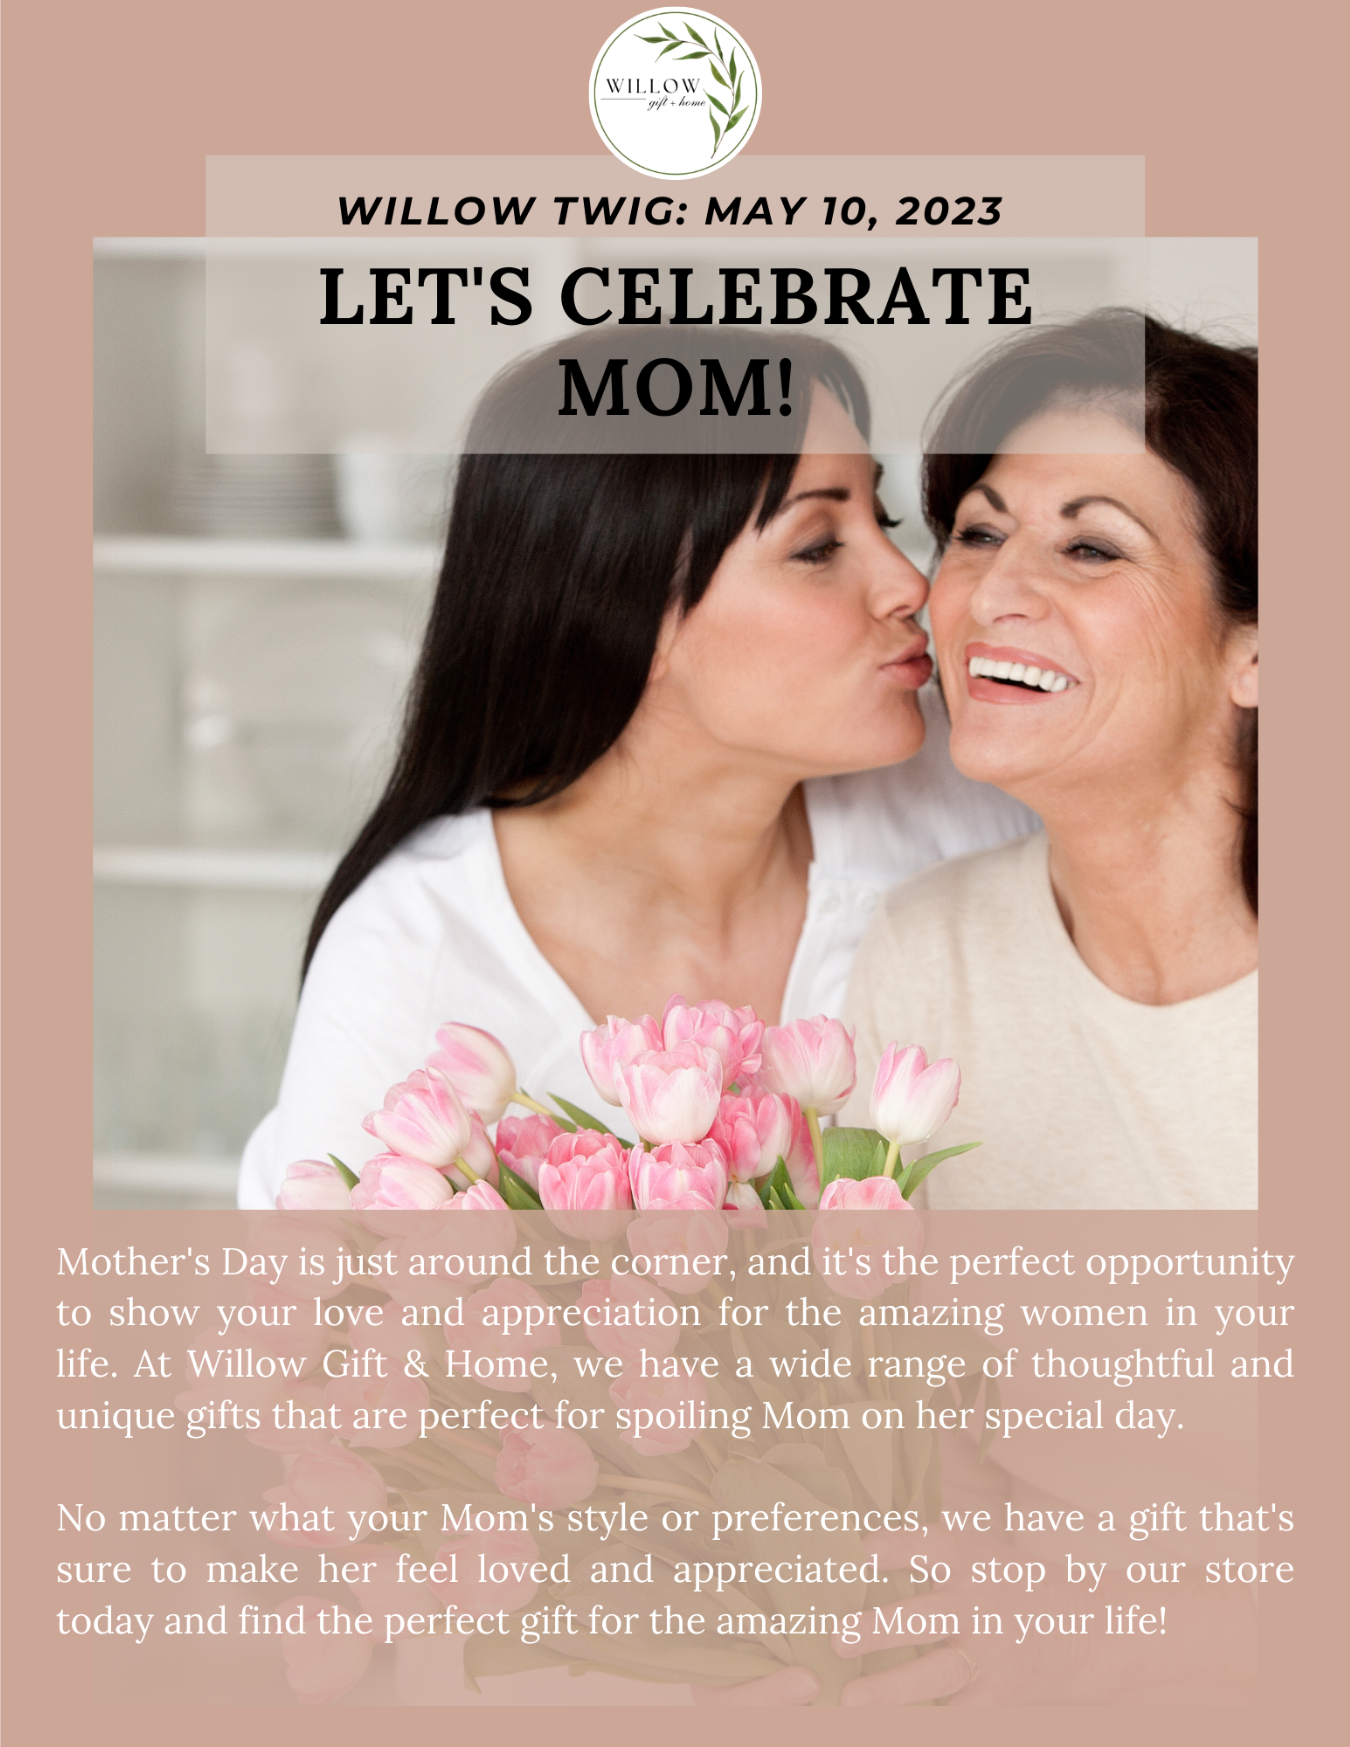 Let's celebrate mom on Mother's Day 